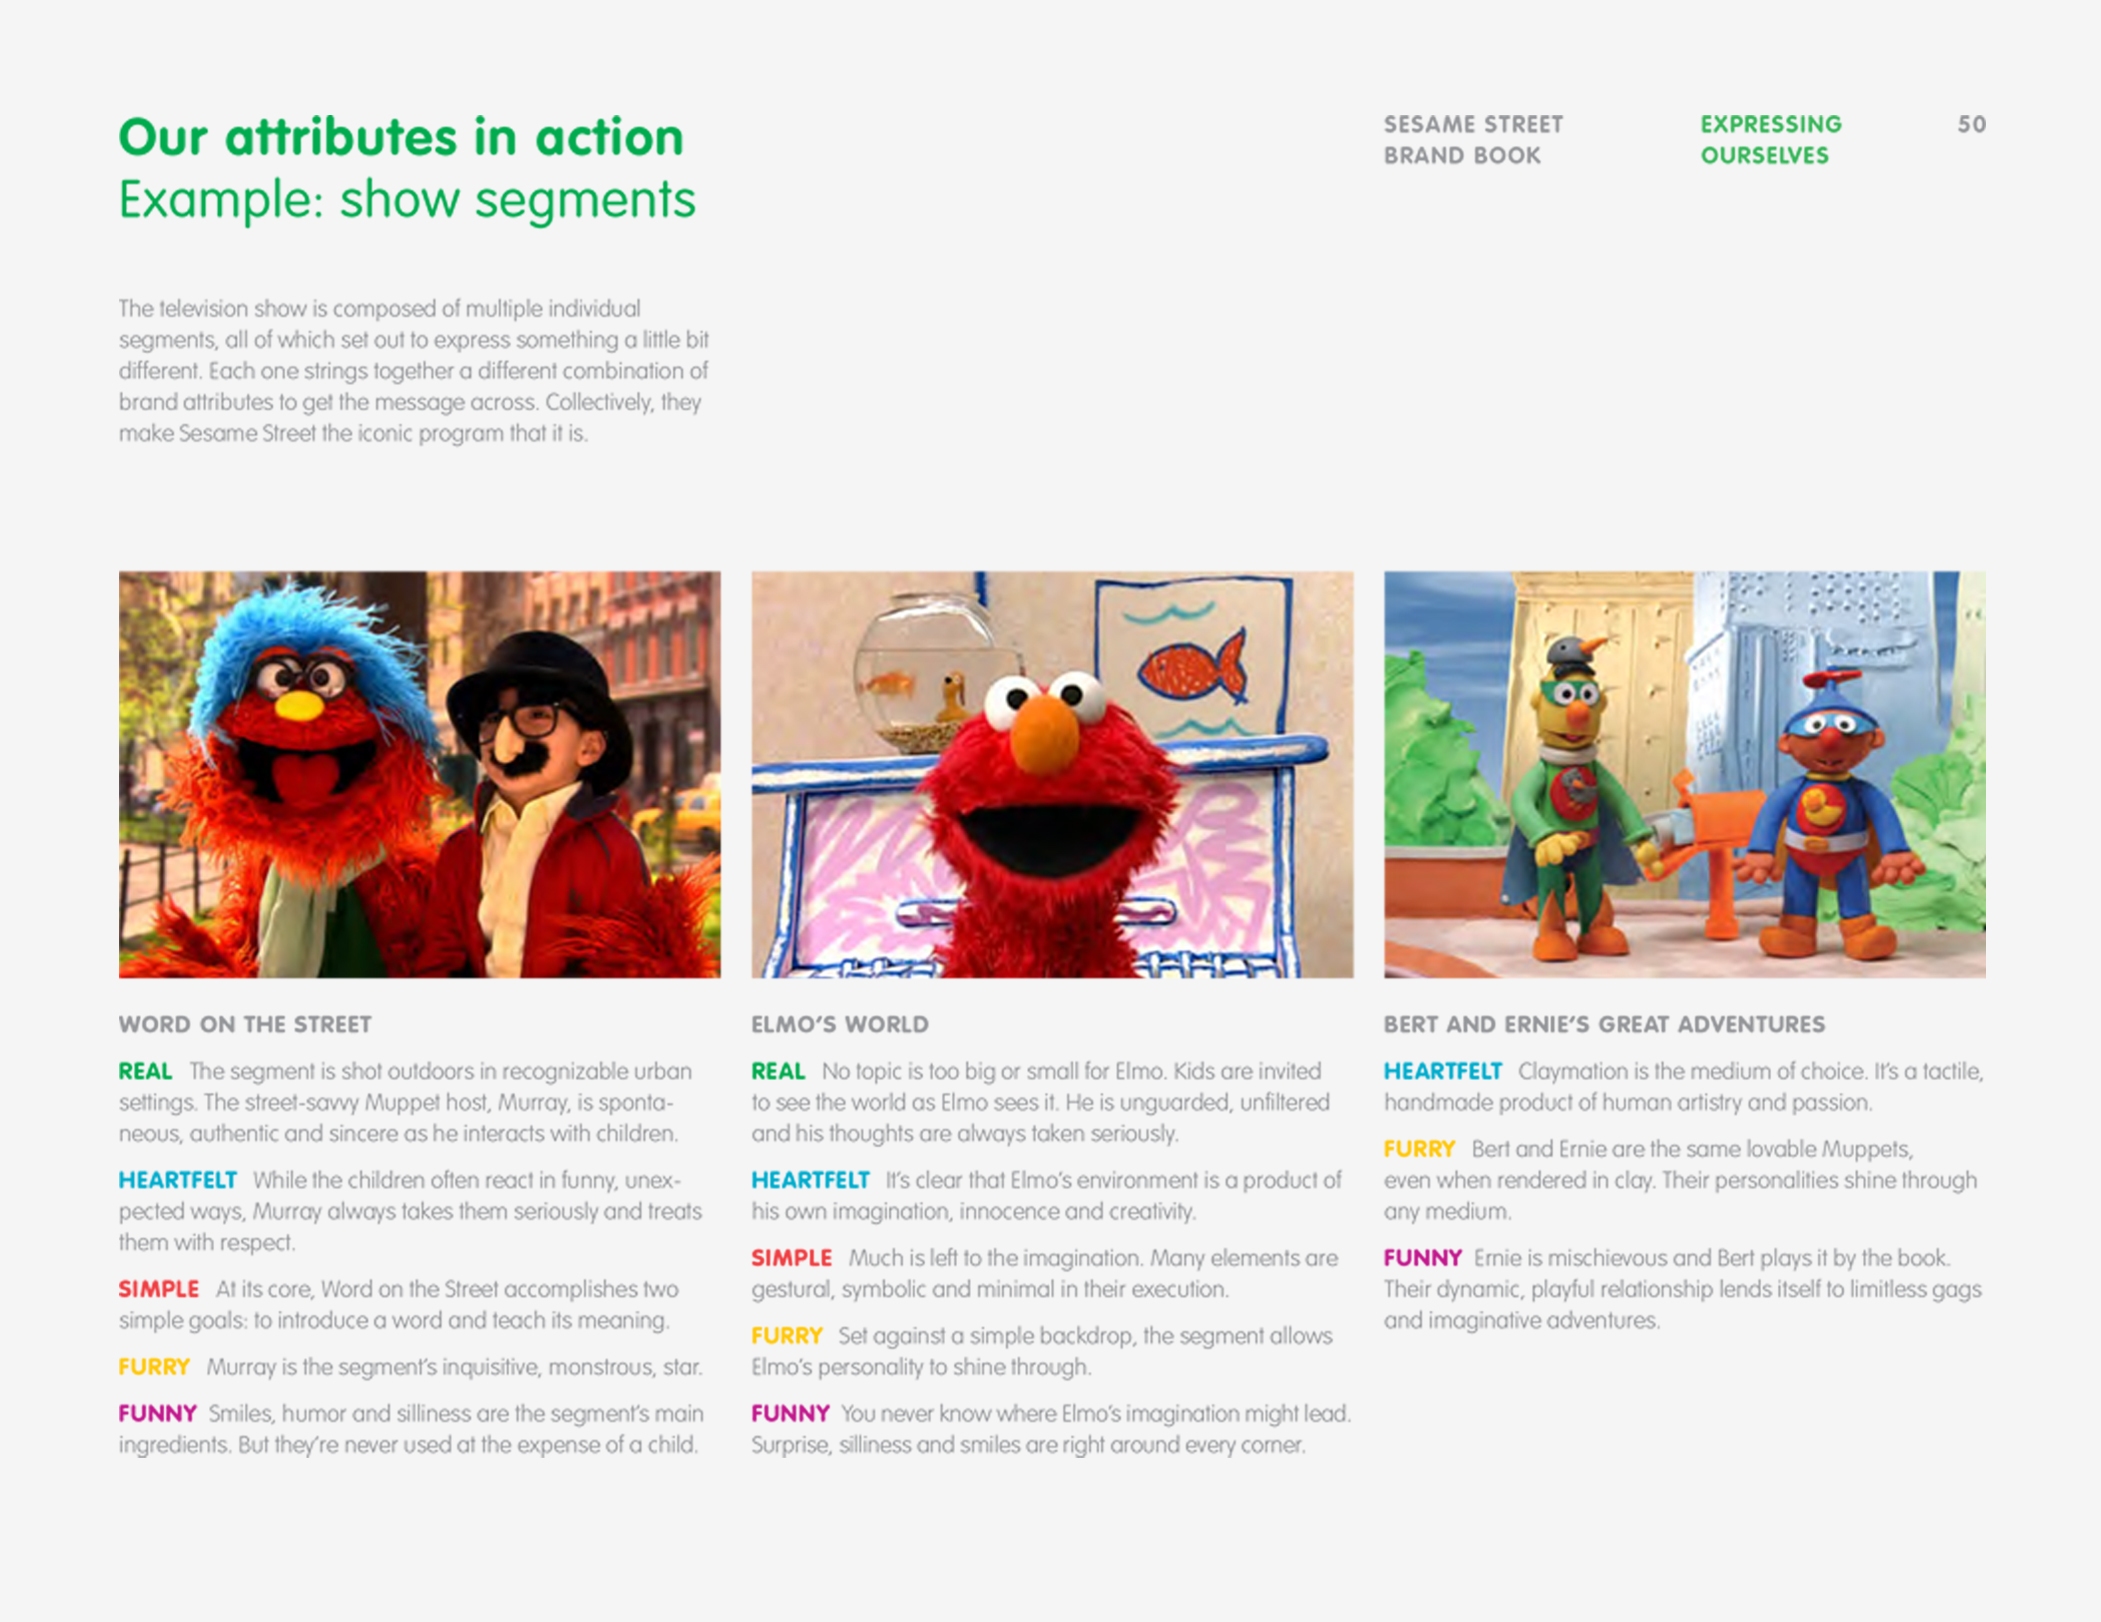 A brand attribute page from the Sesame Workshop Brand Book showing the brand attributes in action in scenes from the shows.